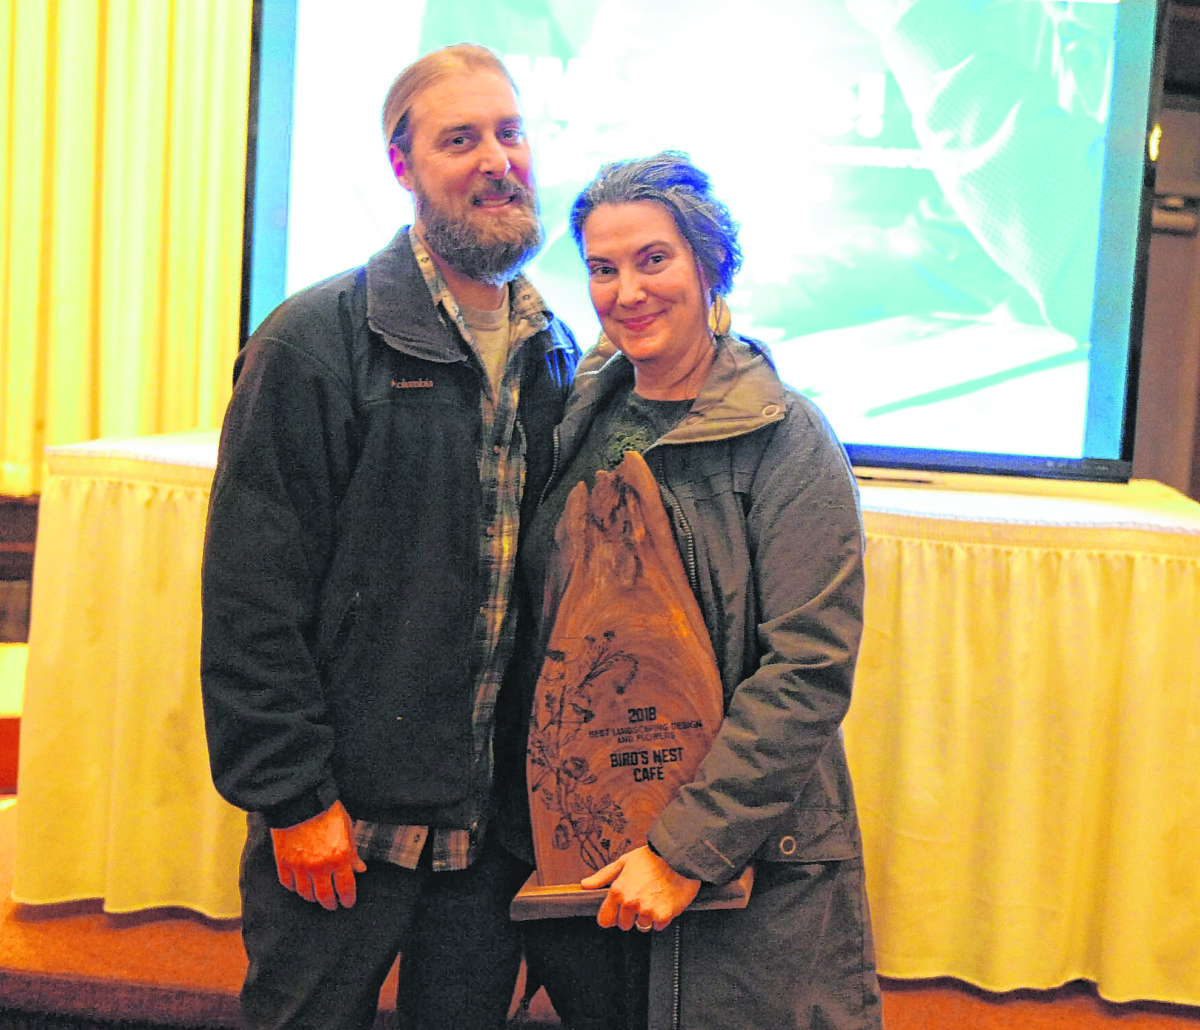 Lance and Tyra Miller pose for a photo after their restaurant the Bird’s Nest Café won the Brown County Beautification award for landscape design at the Brown County Chamber of Commerce annual meeting Jan. 31, 2019. | Brown County Democrat file photo